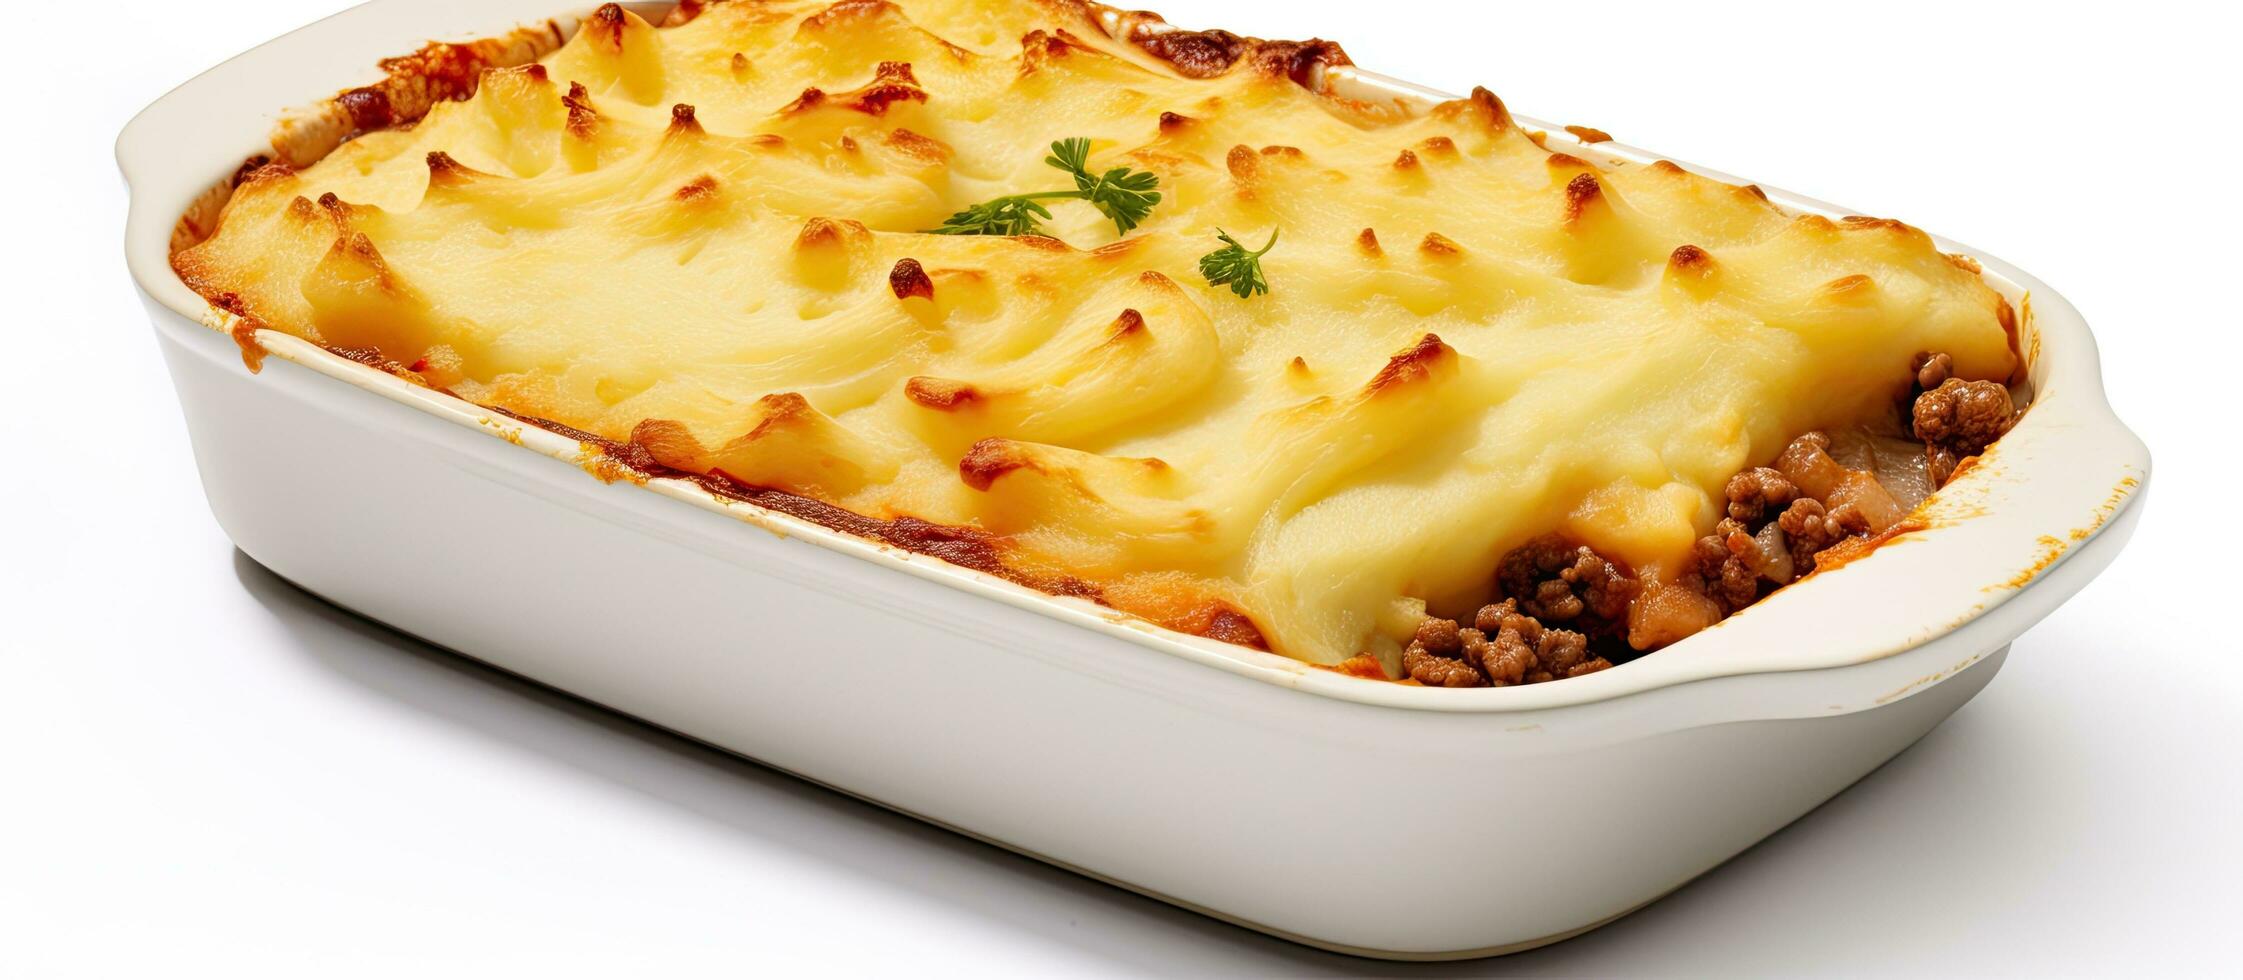 British Dish Shepherd's Pie, made with ground meat, mashed potatoes, and a crust of cheddar cheese. photo